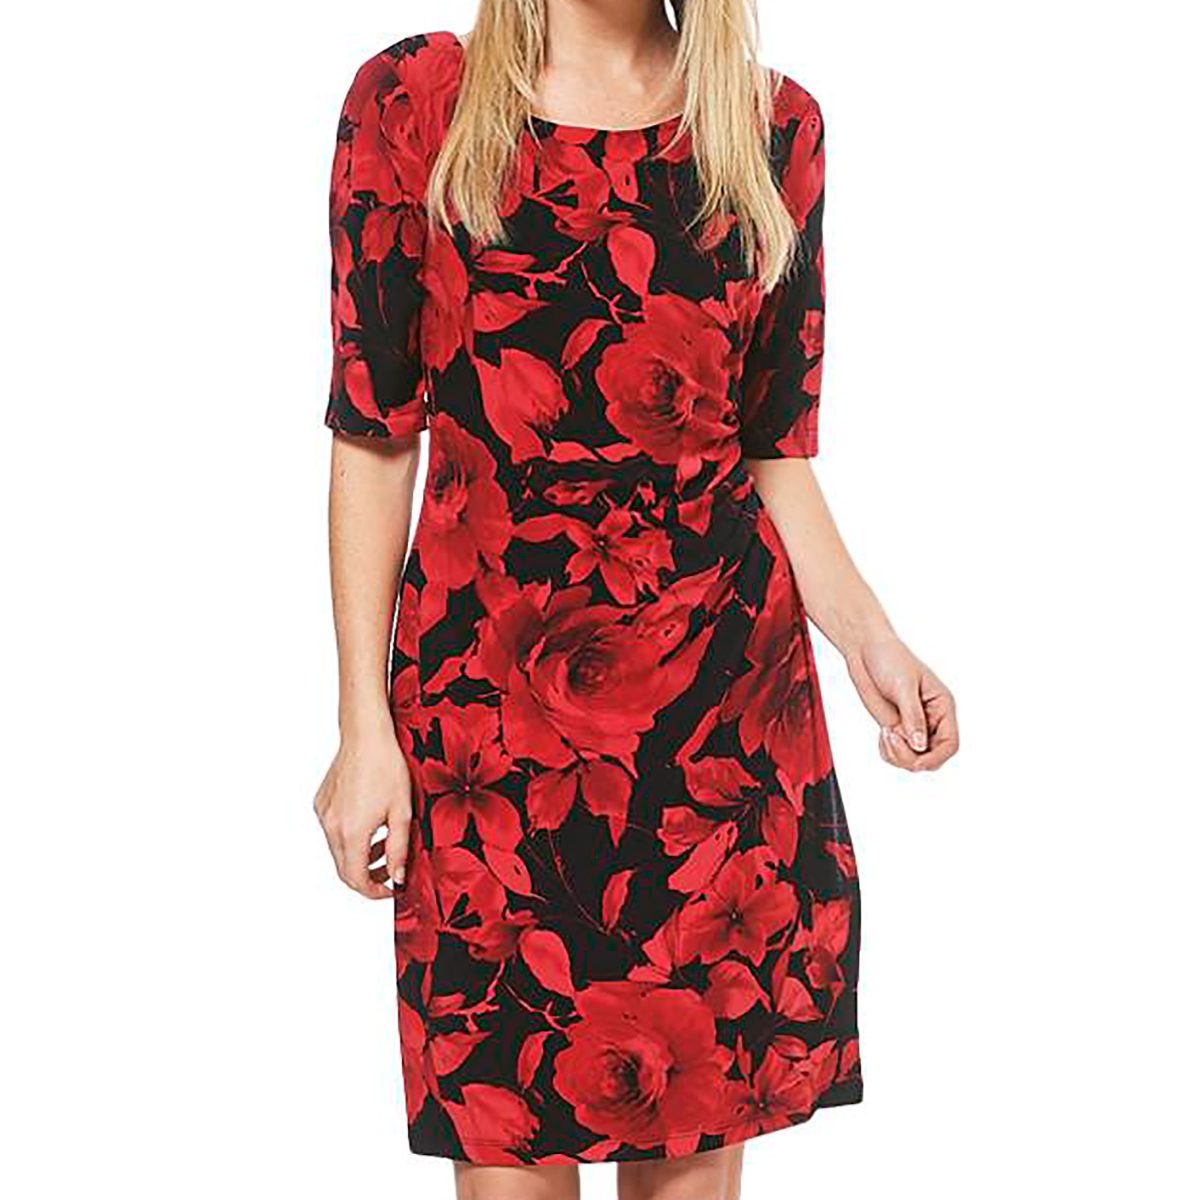 Petite Connected Apparel Elbow Sleeve Floral Sheath Dress